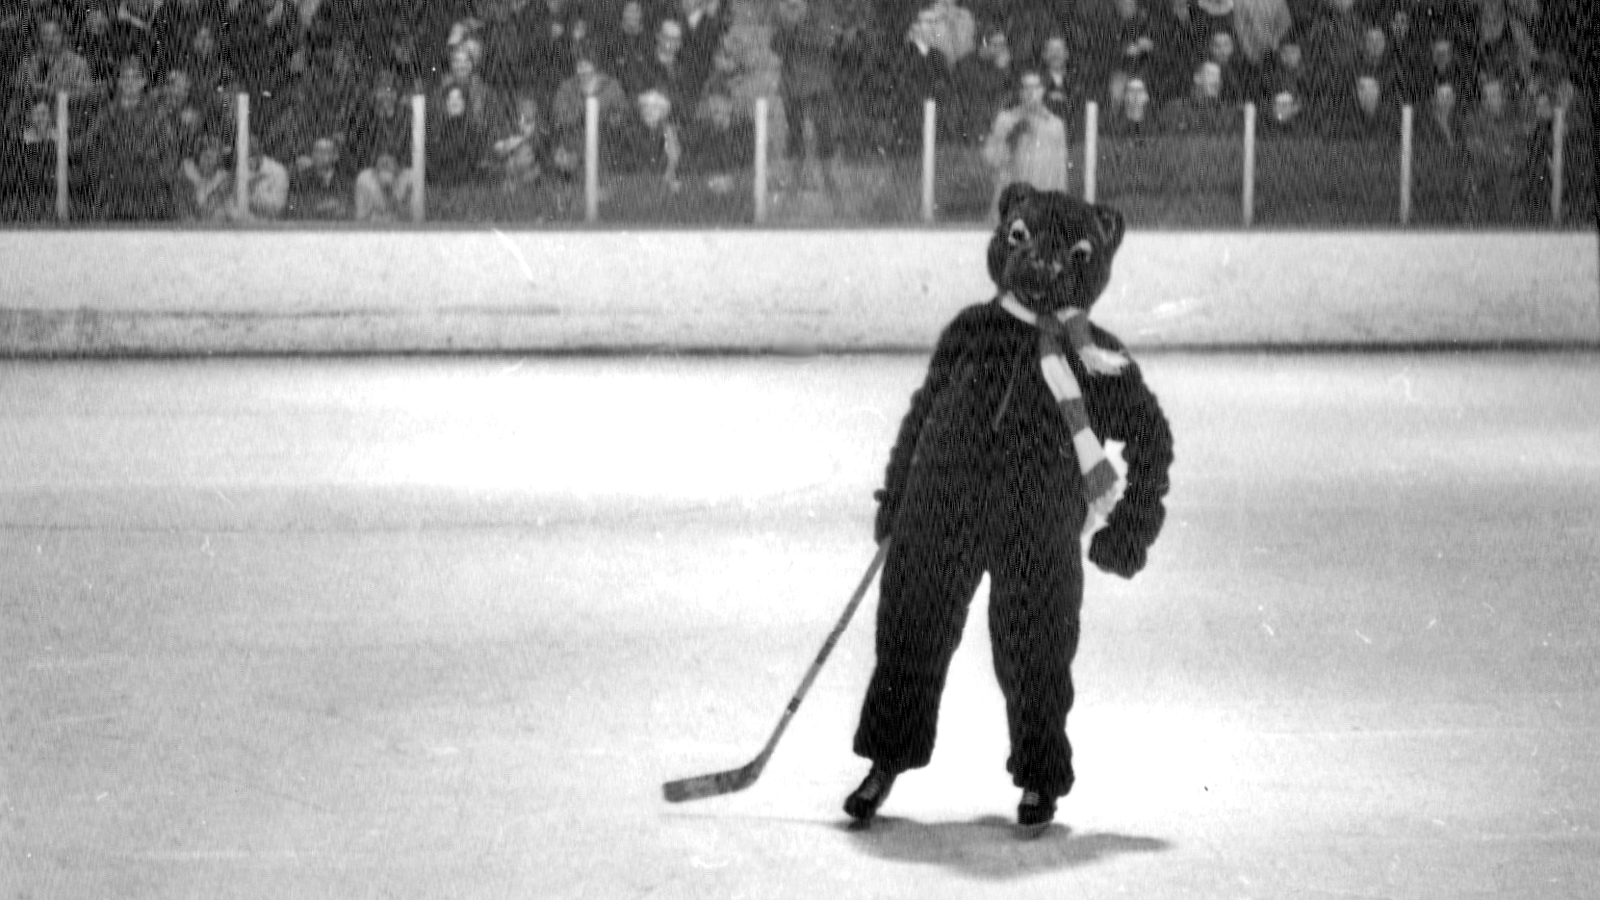 An ancestor of the current Touchdown mascot takes to the ice at Lynah Rink